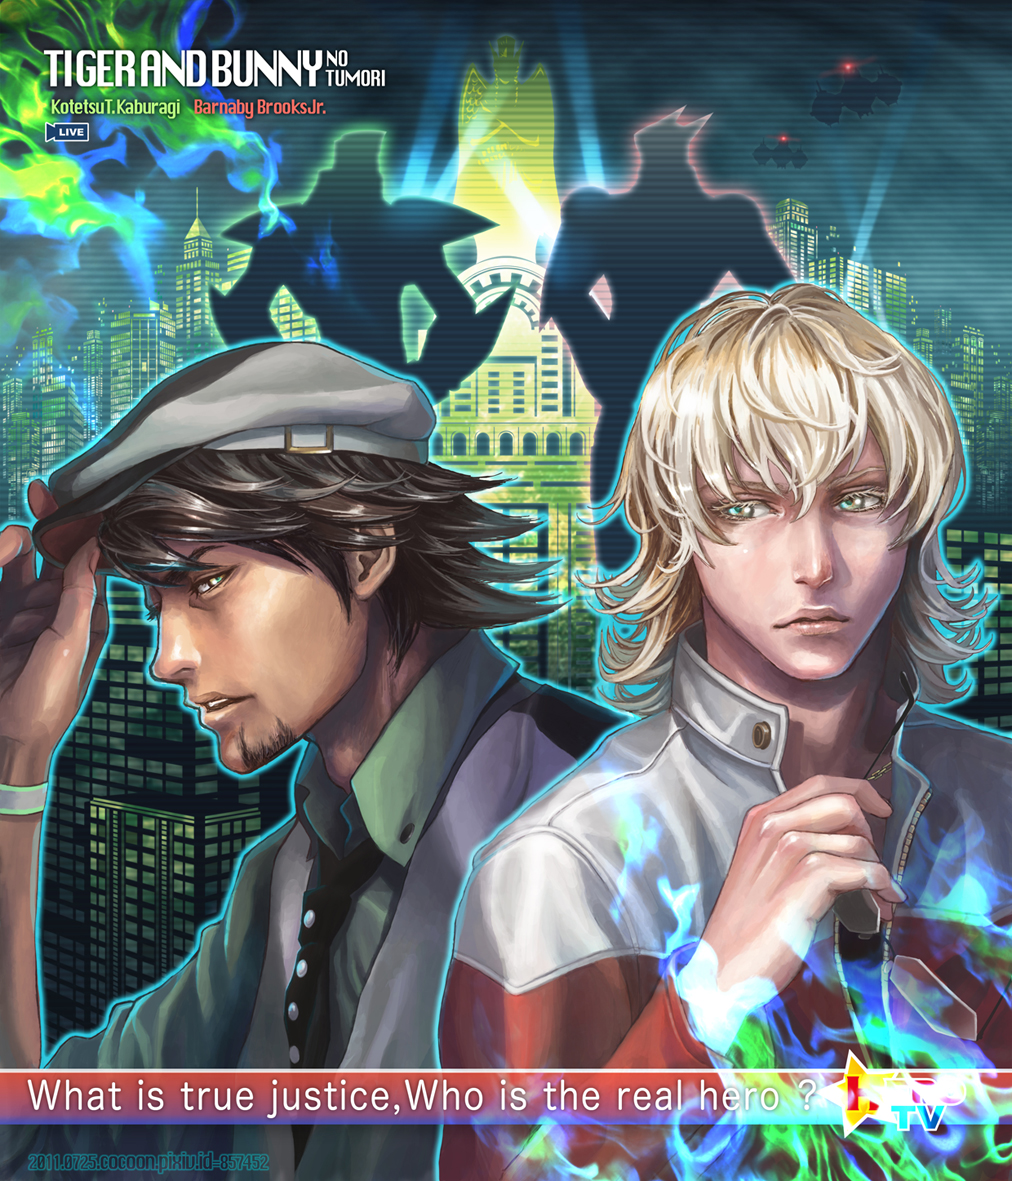 adjusting_hat barnaby_brooks_jr blonde_hair blue_fire blue_flame brown_eyes brown_hair cabbie_hat cocoon_(yuming4976) facial_hair fire flame glasses glasses_removed green_eyes green_fire green_flame hat holding holding_glasses jacket kaburagi_t_kotetsu male multiple_boys necktie night night_sky power_armor power_suit realistic red_jacket short_hair silhouette sky stubble superhero tiger_&amp;_bunny vest wild_tiger